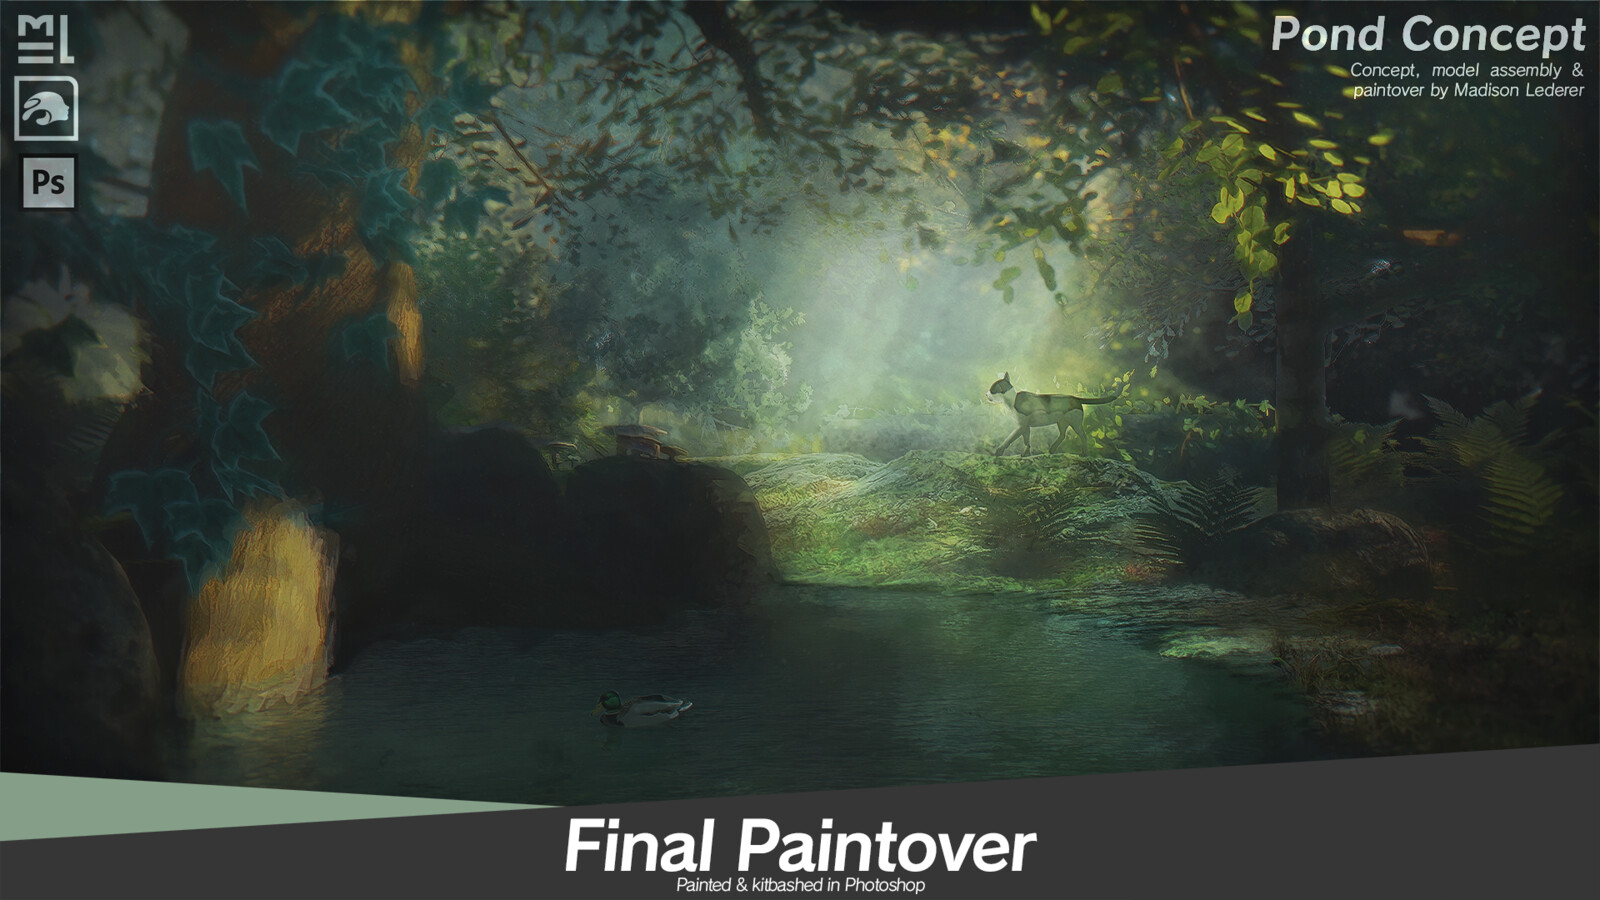 The near-final paintover, with painted details, additions and environmental kitbashing.